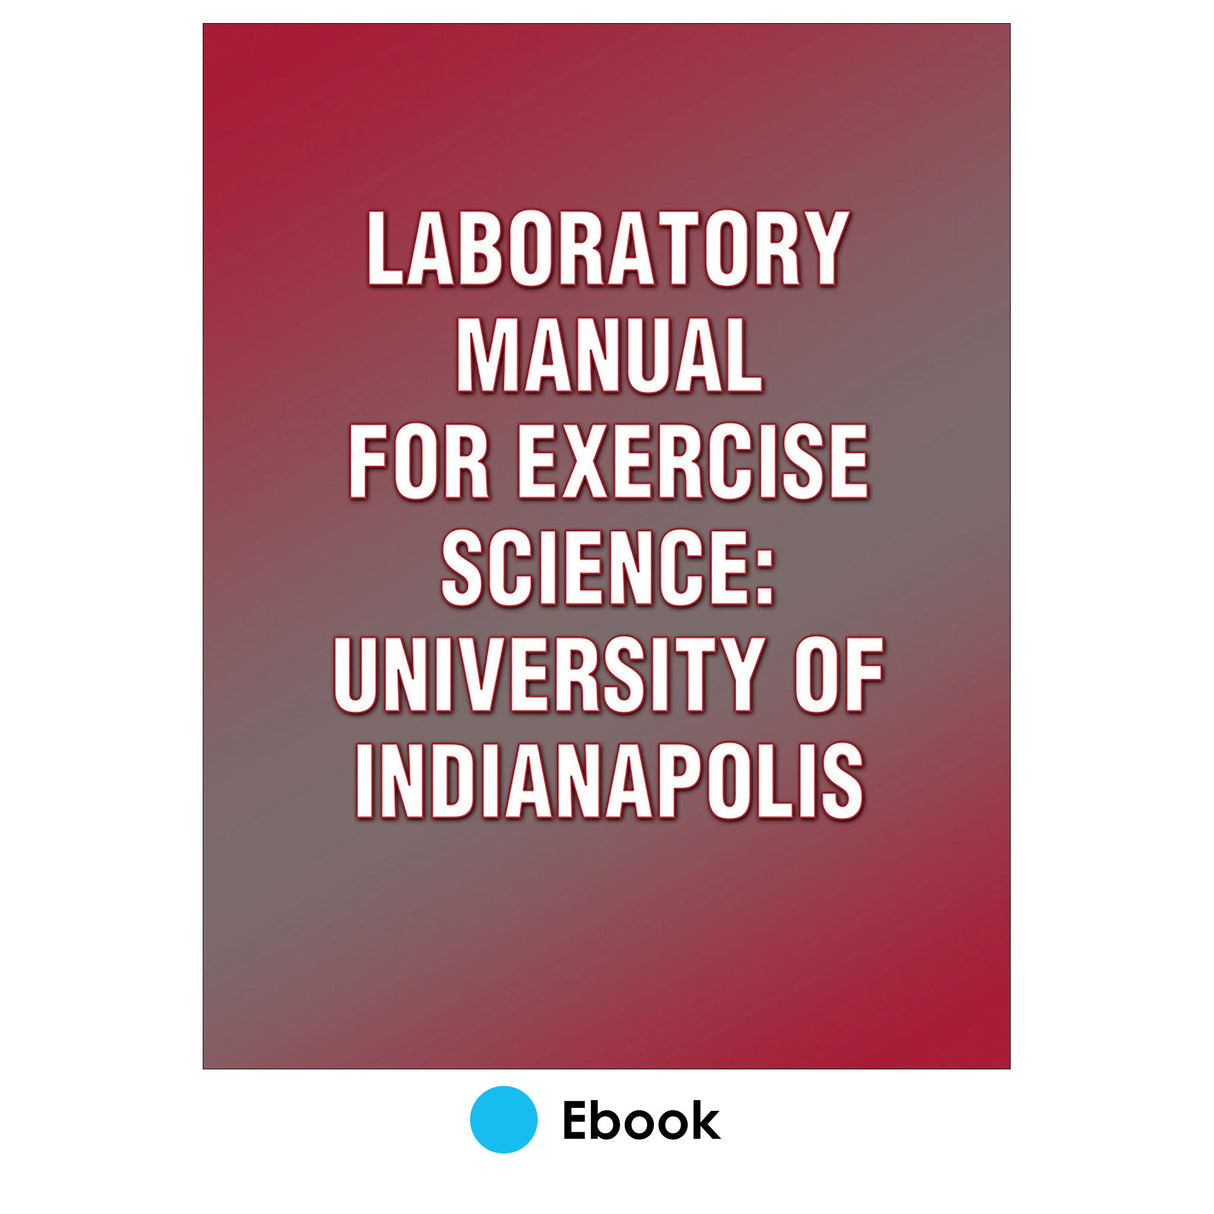 Laboratory Manual for Exercise Science: University of Indianapolis